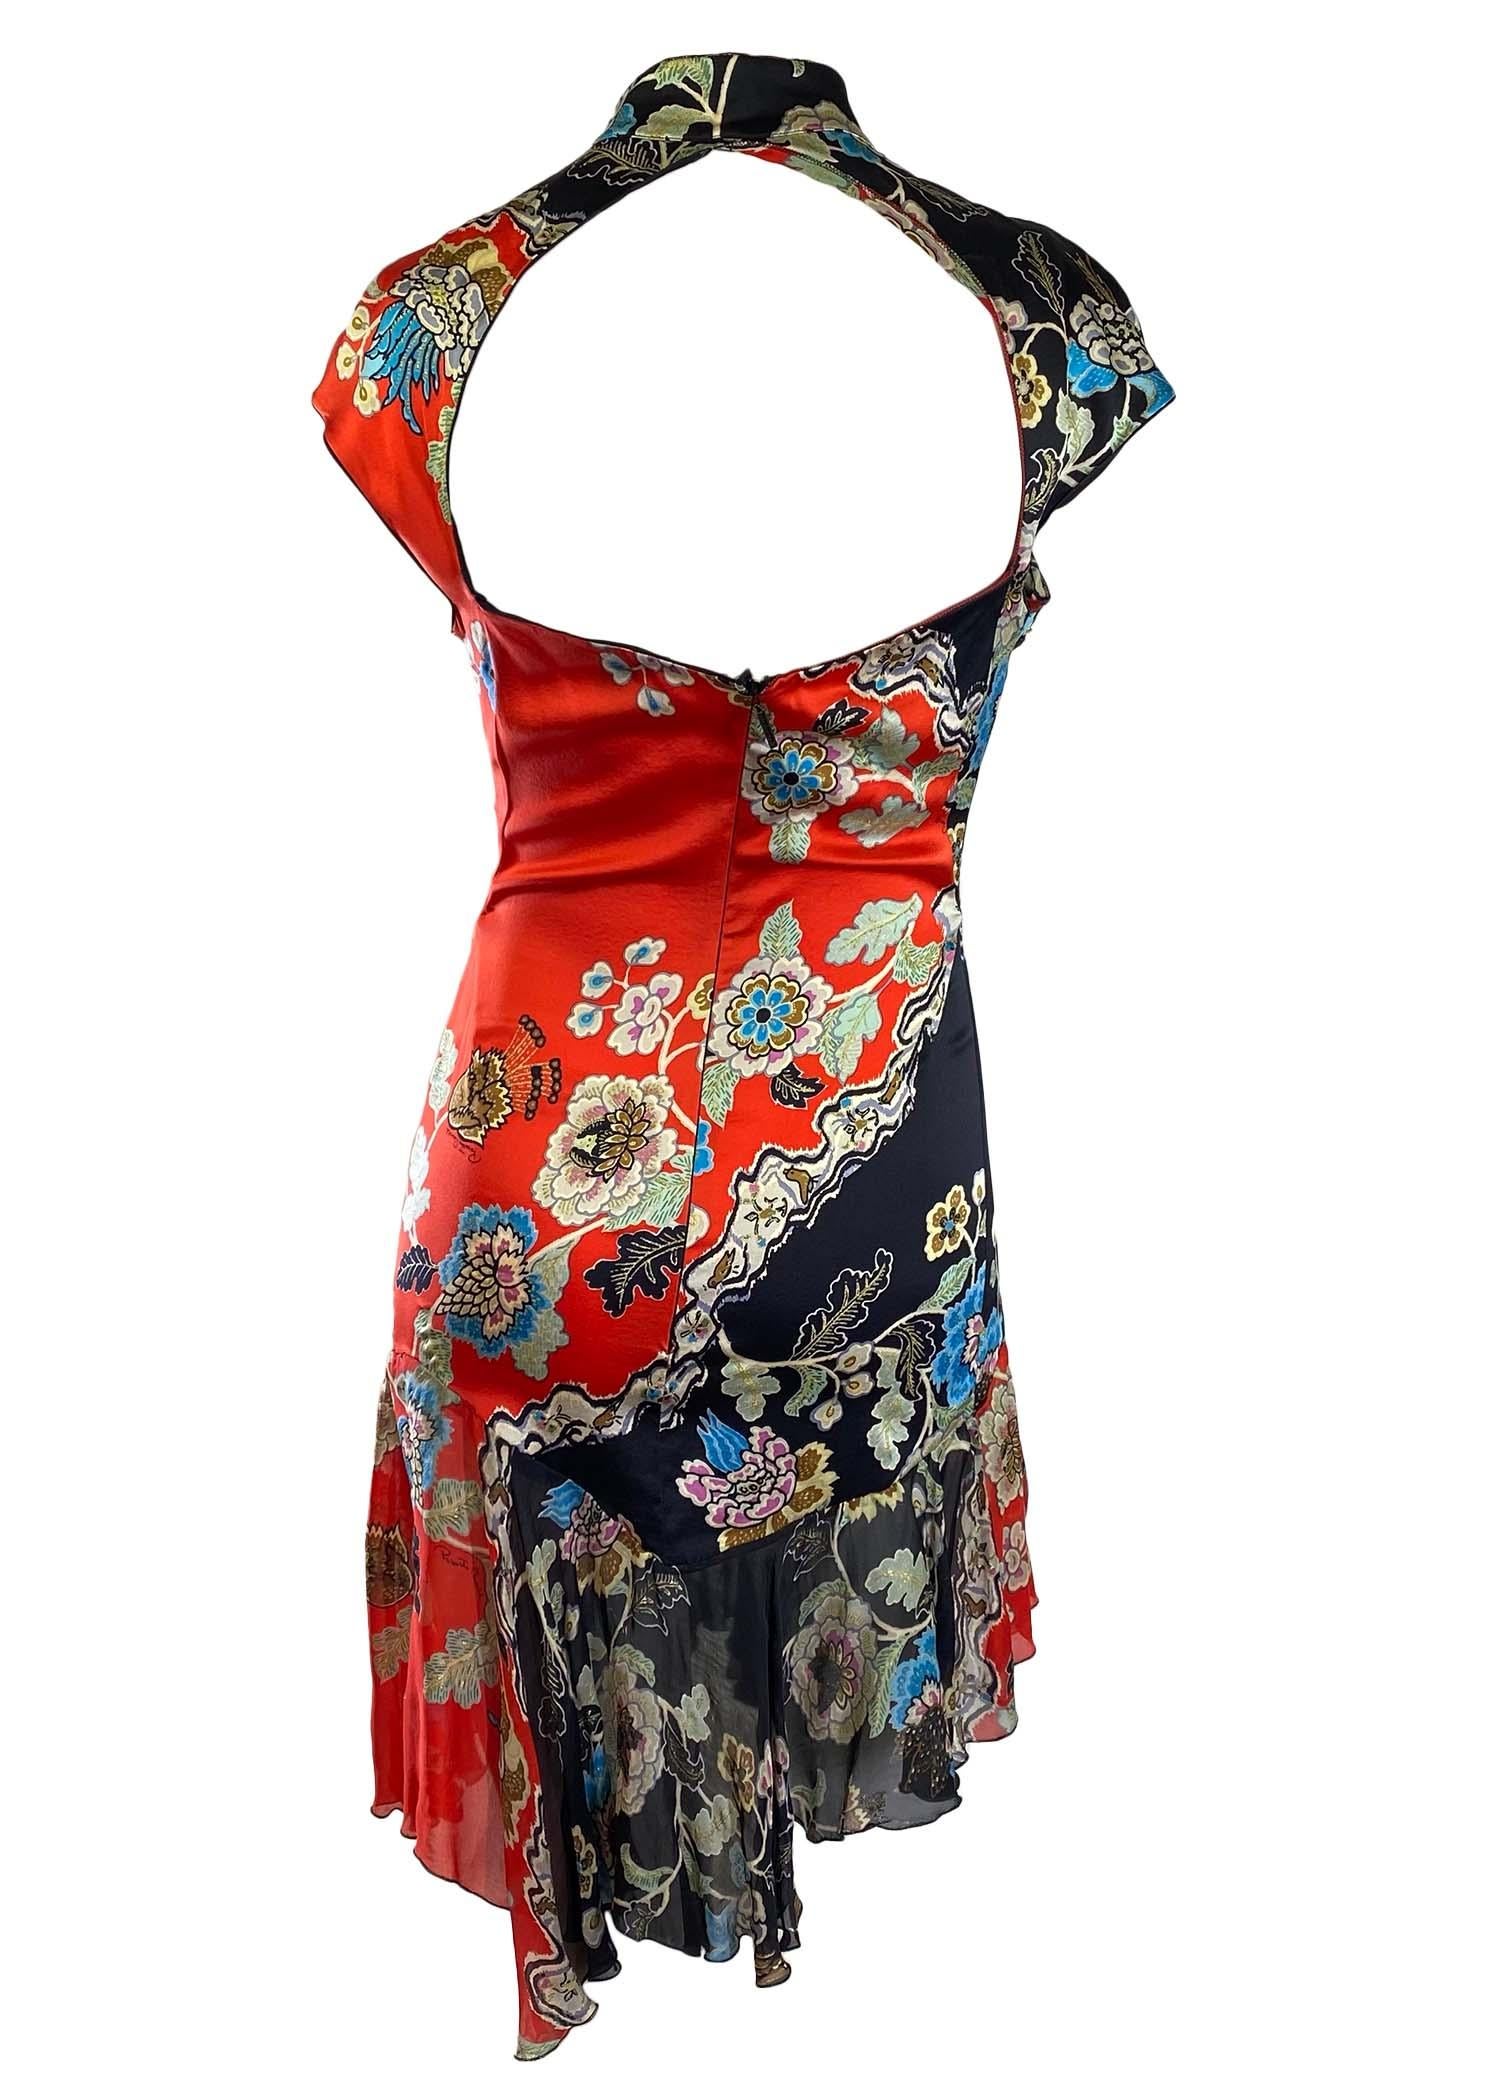 Brown S/S 2003 Roberto Cavalli Red Chinoiserie Cheongsam Cap Sleeve Dress Backless For Sale